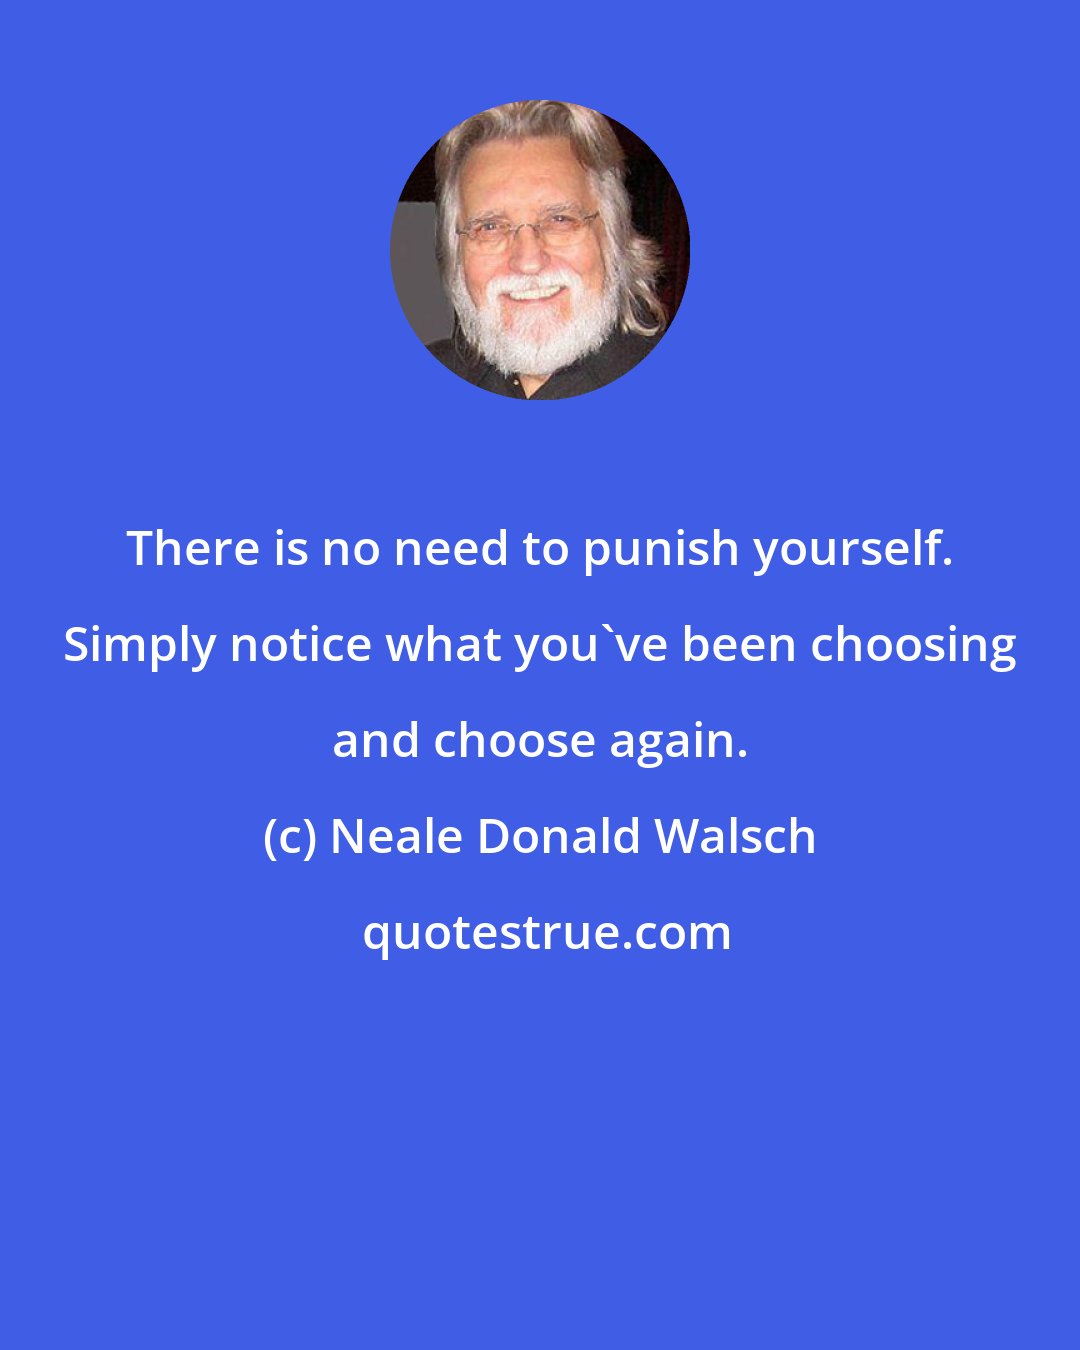 Neale Donald Walsch: There is no need to punish yourself. Simply notice what you've been choosing and choose again.